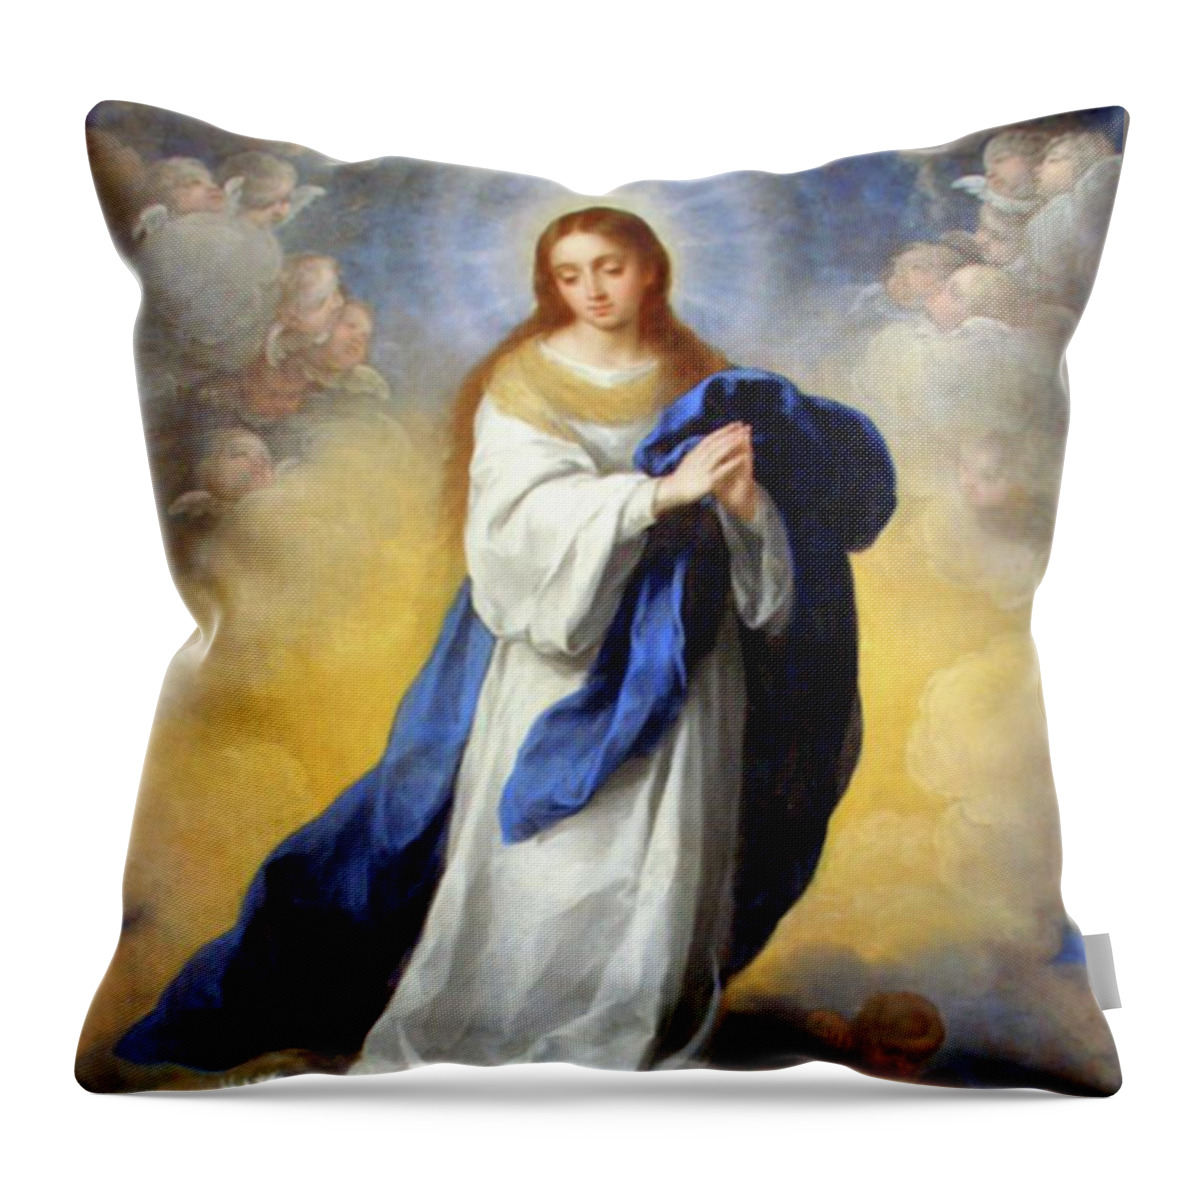 Immaculate Conception Throw Pillow featuring the mixed media The Immaculate Conception Virgin Mary Assumption 105 by Bartolome Esteban Murillo